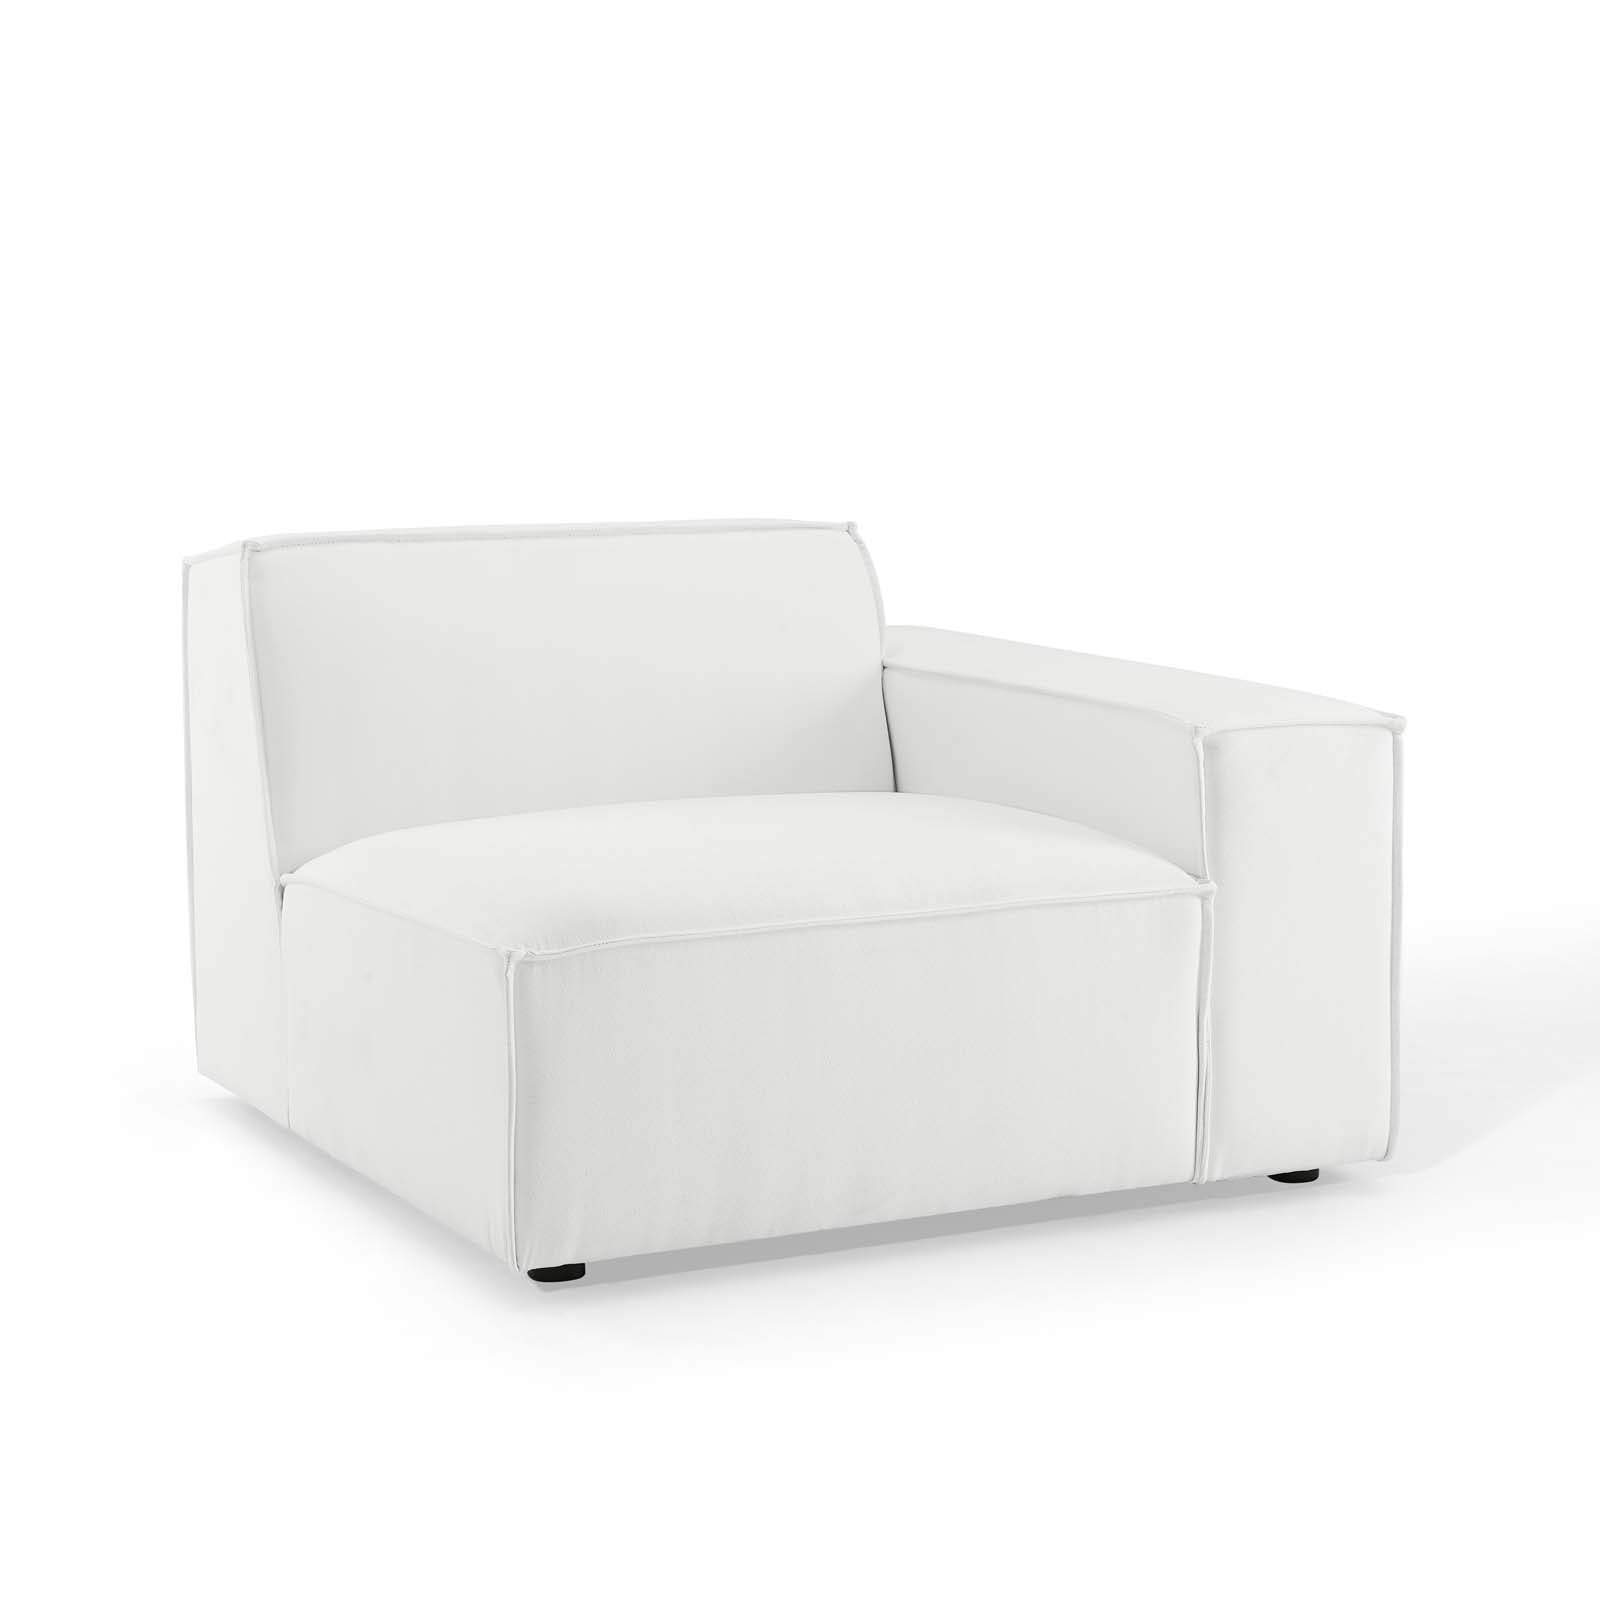 Restore 2-Piece Sectional Sofa - East Shore Modern Home Furnishings